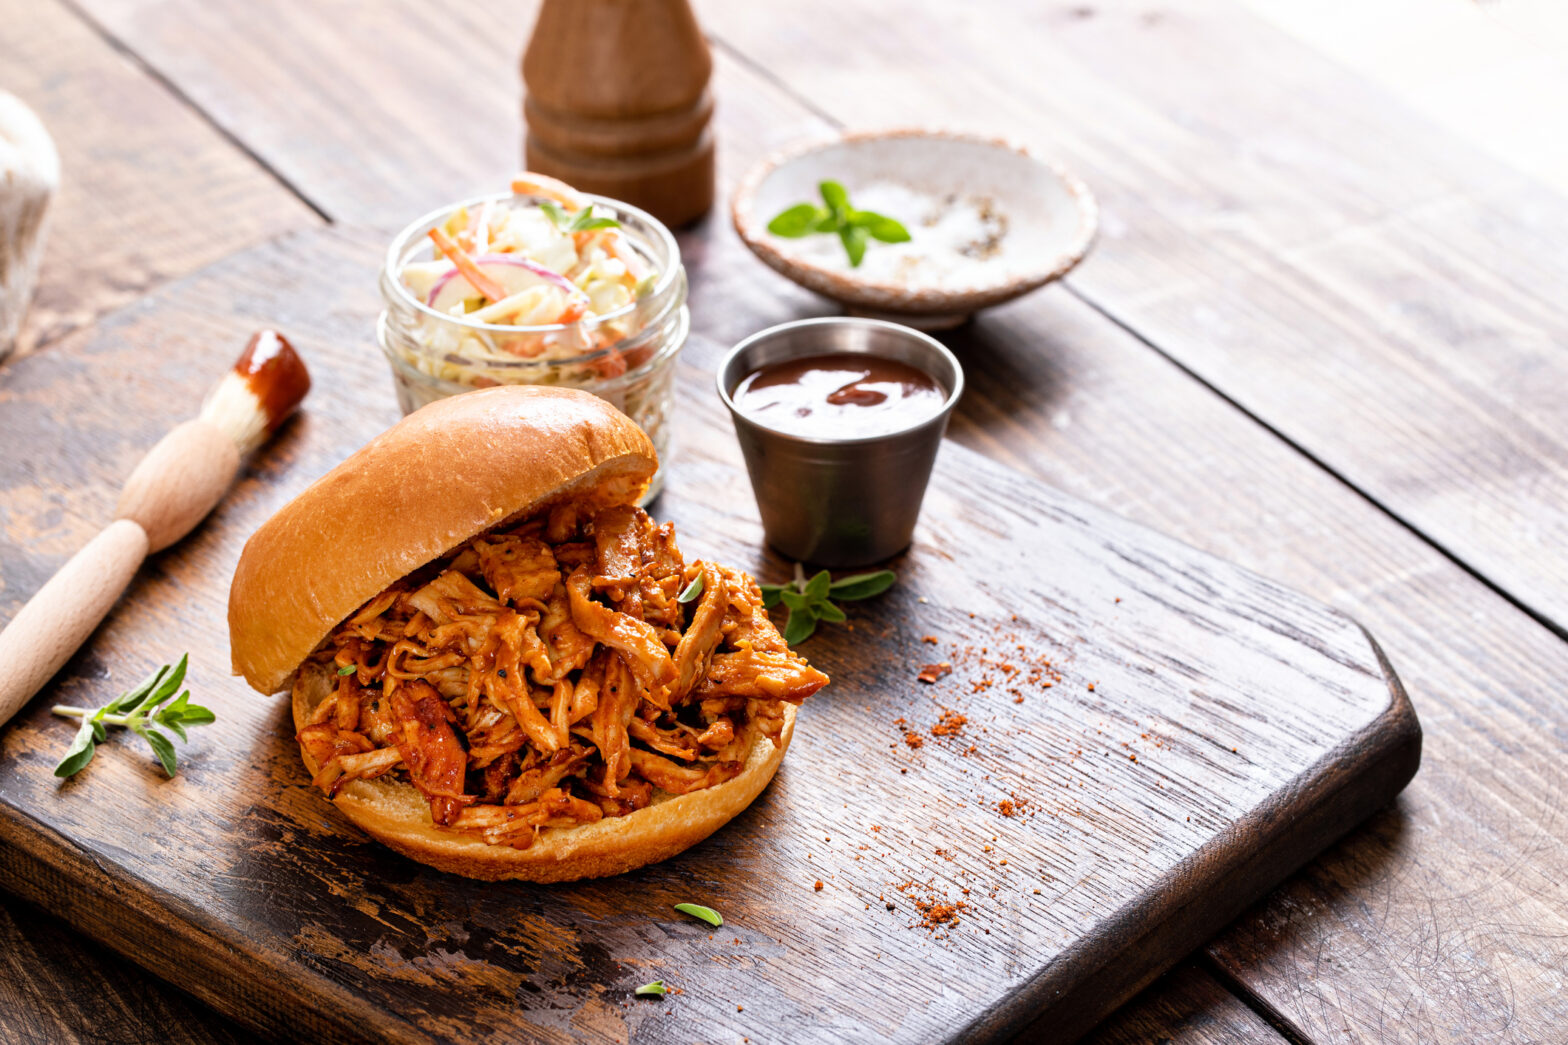 Pulled bbq chicken sandwich on a brioche bun served with cole slaw and bbq sauce. For an easy crockpot recipe check out today's story.